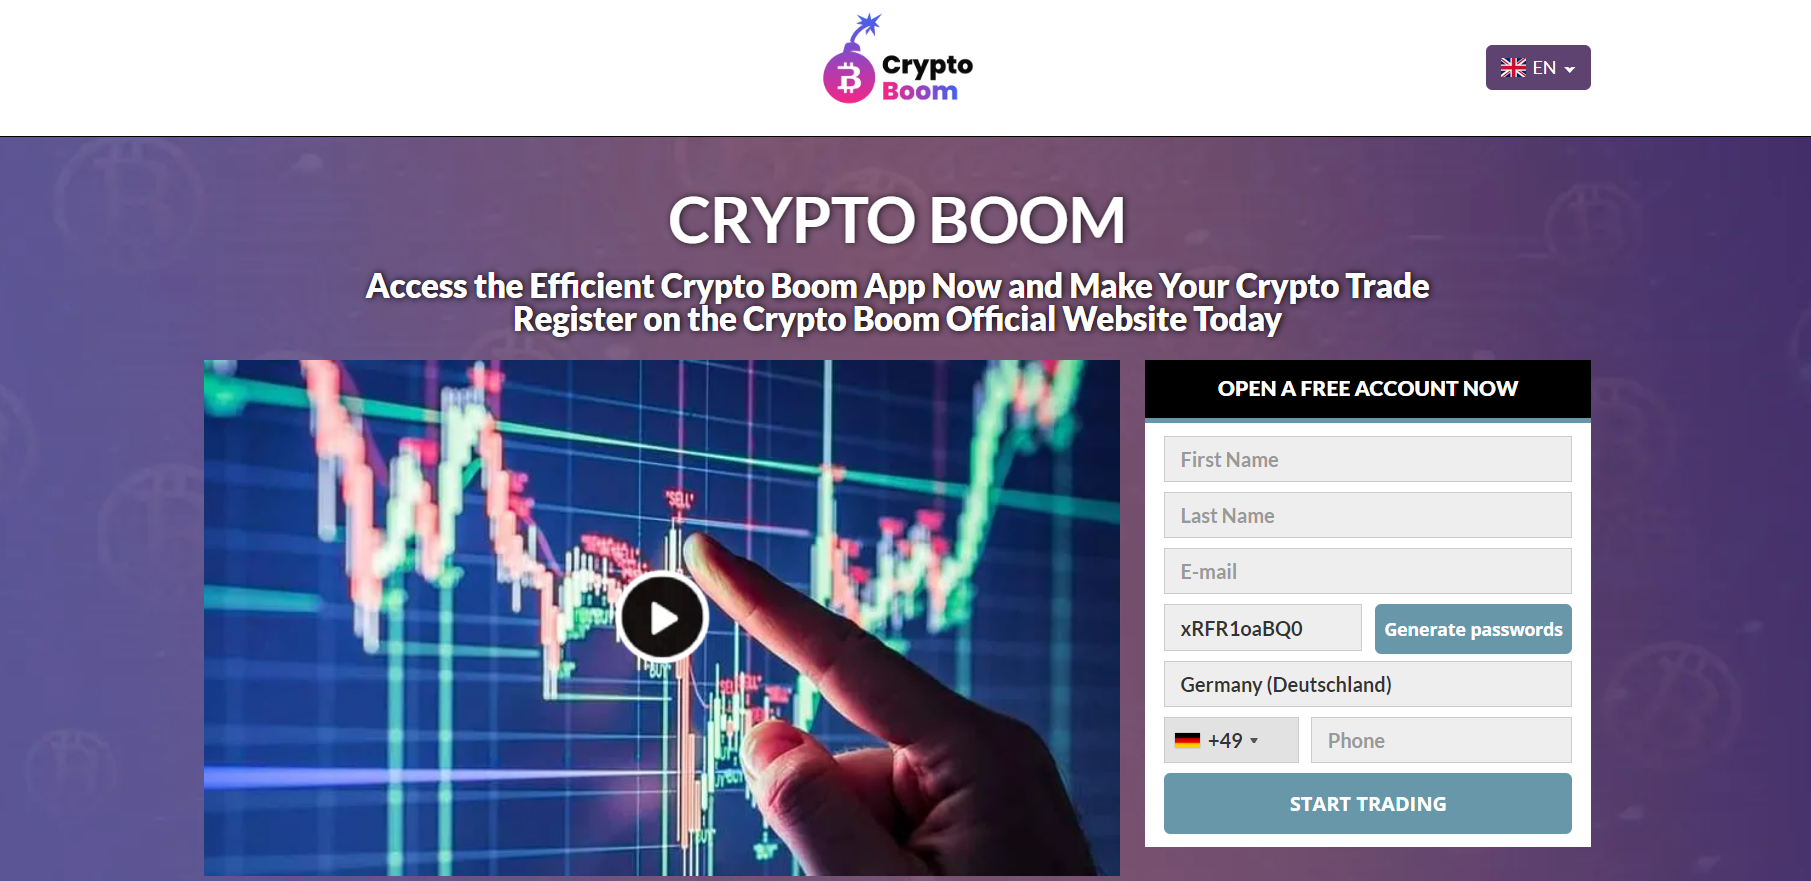 the official website of Crypto Boom